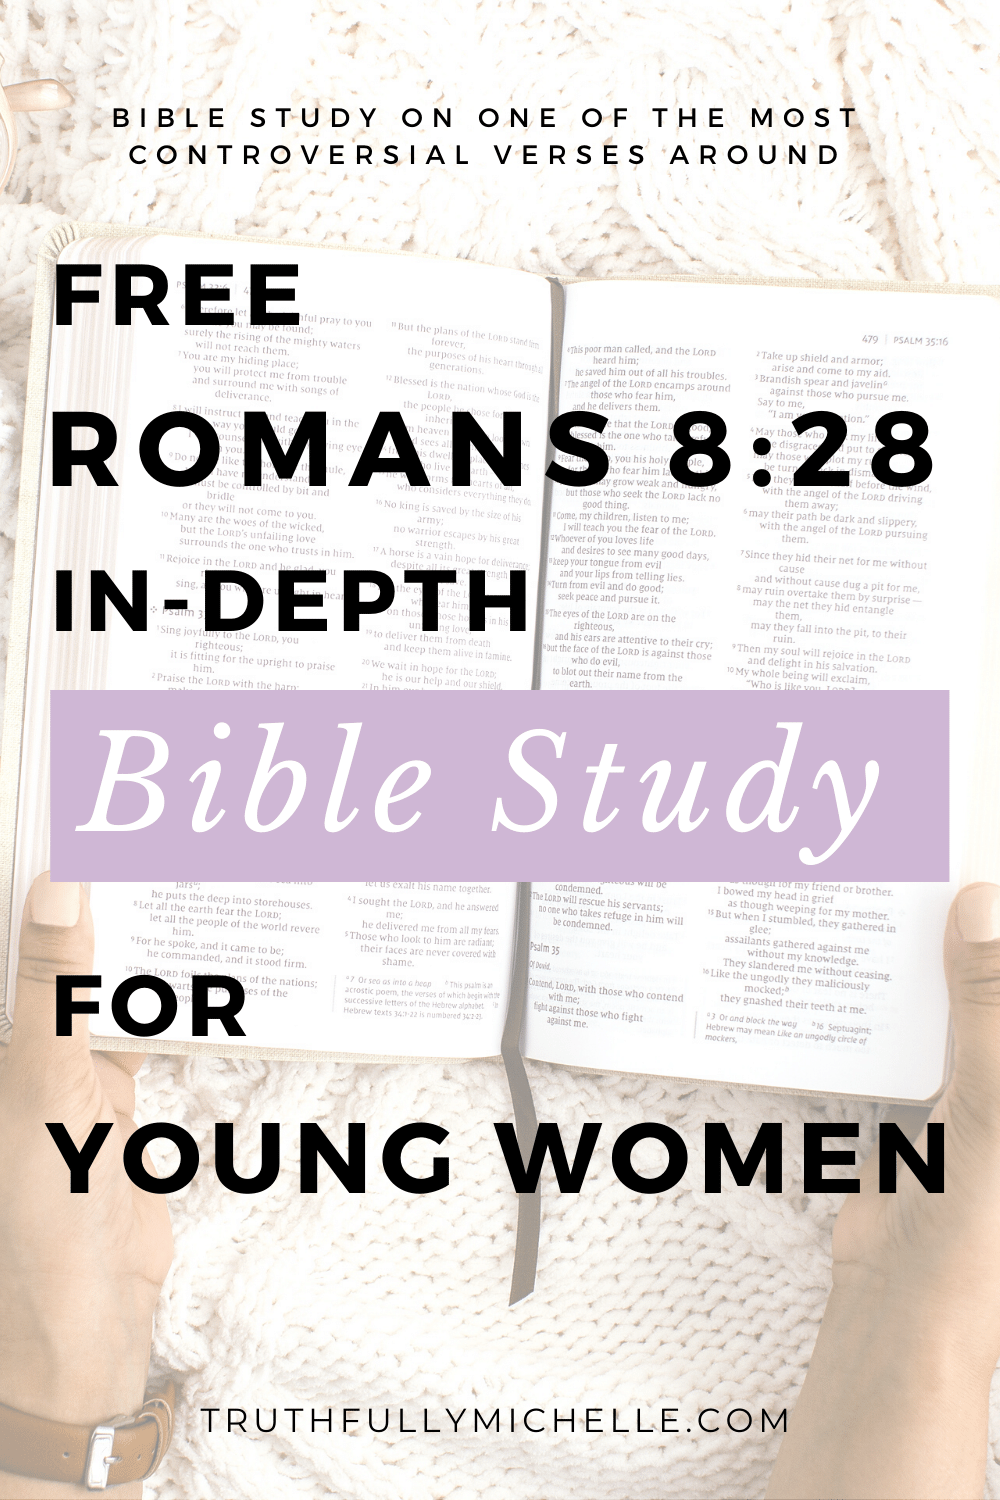 Best Bible Study for Young Women, Best Bible Study on Romans 8:28, Bible Study Discussion Questions Romans 8, Bible Study for Women, Bible Study for Young Adults, Bible Study Romans 8:28, Book of Romans Bible Study, Devotion on Romans 8:28, Devotional Romans 8:28, Free Bible Study for Young Women, Free Romans Bible Study, Romans 8 Bible Study, Romans 8 Devotion, Romans 8:28 Bible Study, Romans 8:28 Devotion, Romans Bible Study Free, Romans Bible Study Guide, Romans Bible Study Notes, Romans Bible Study Questions, Romans Devotional